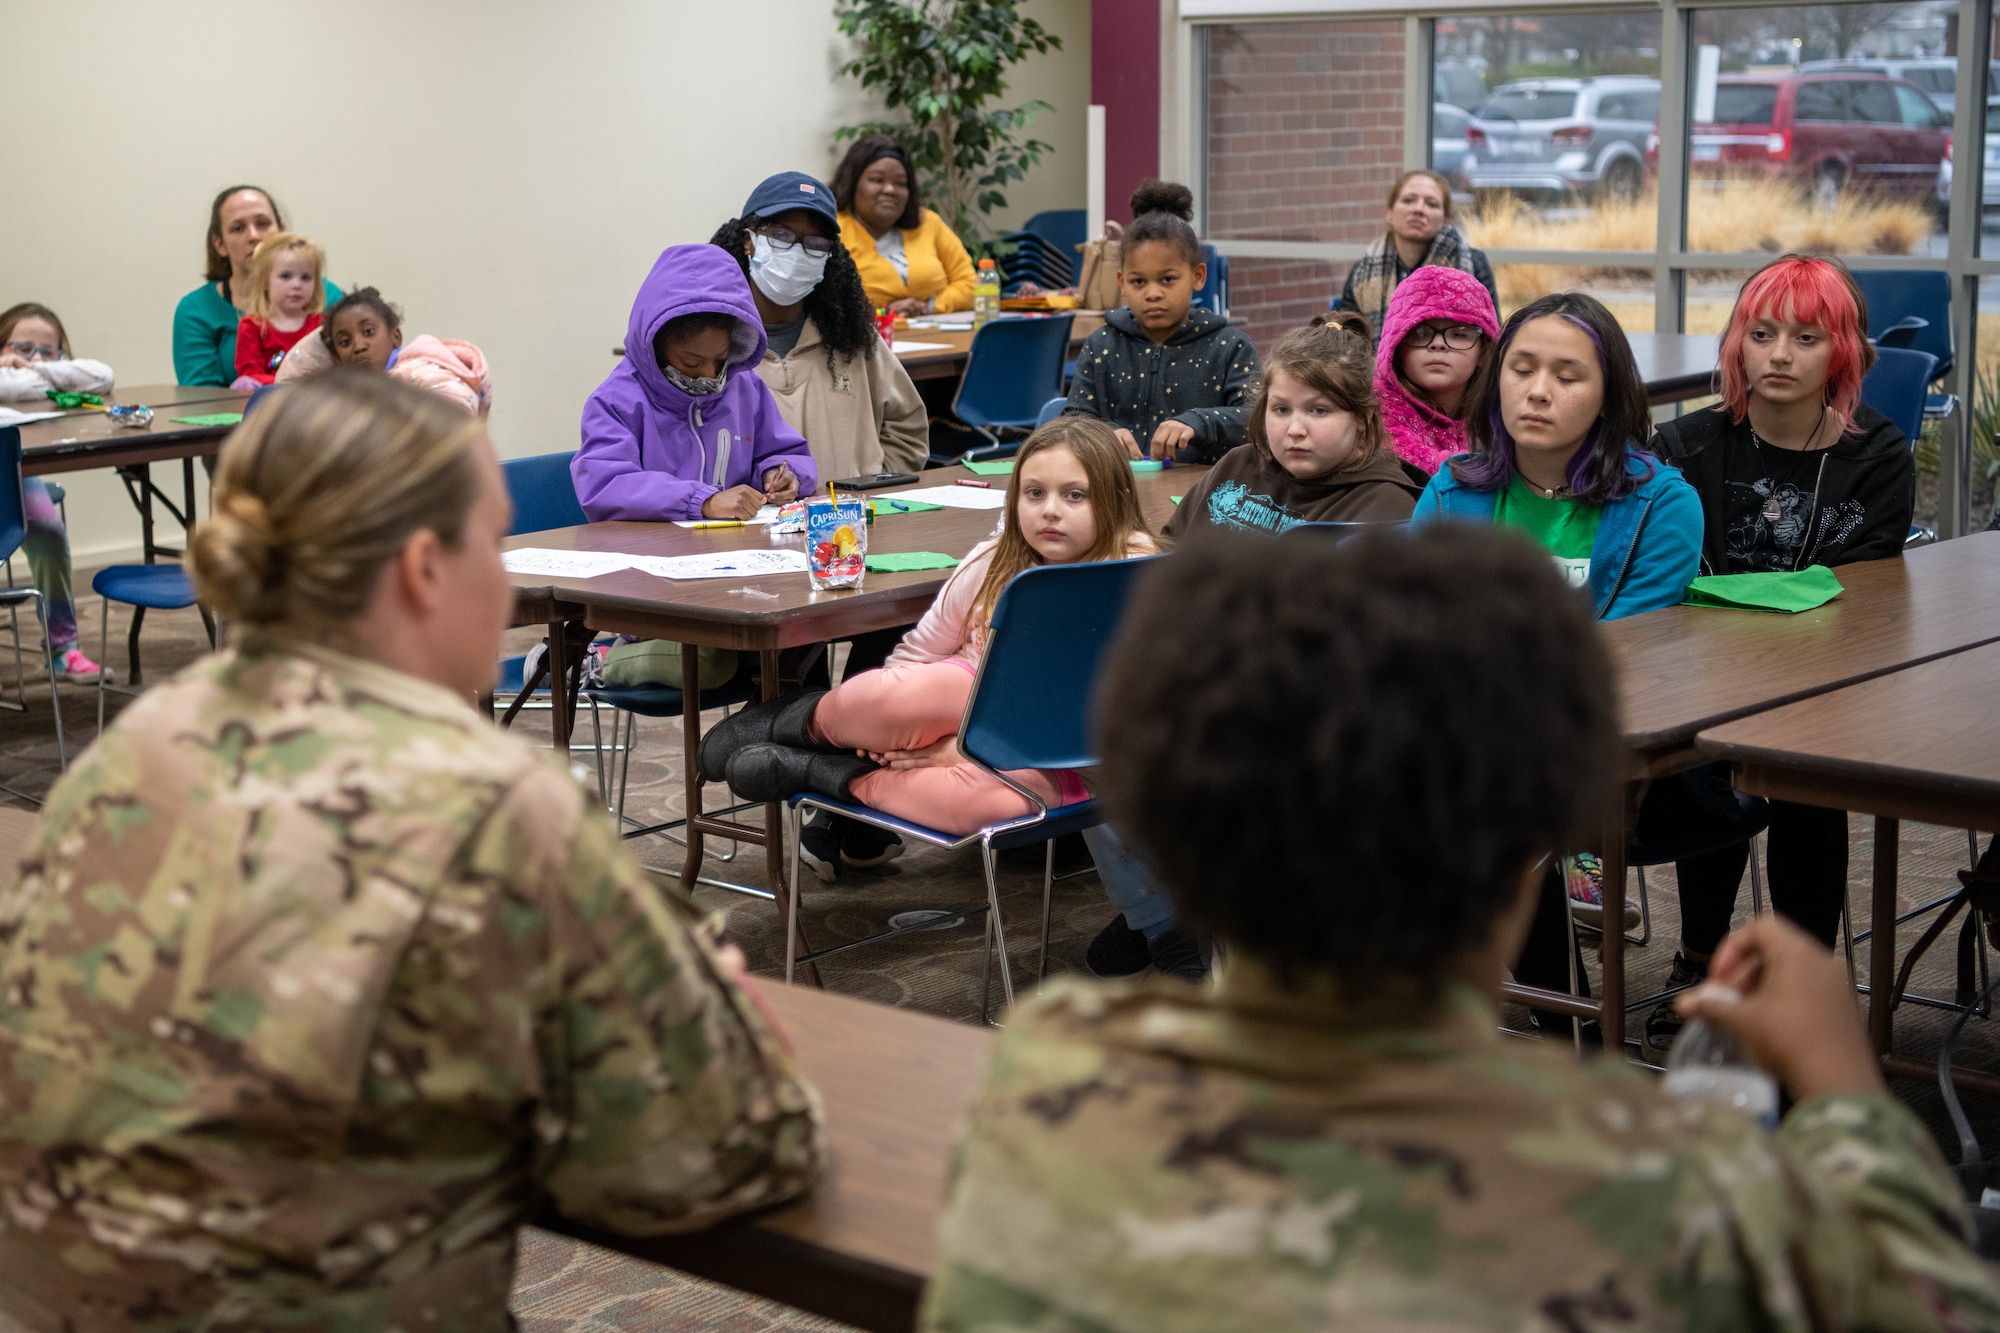 Airmen from the 909th Air Refueling Squadron and 718th Aircraft Maintenance Squadron, participate in a community outreach event with Girl Scouts in honor of Women’s History Month March 21, 2022 in Wichita, Kansas.